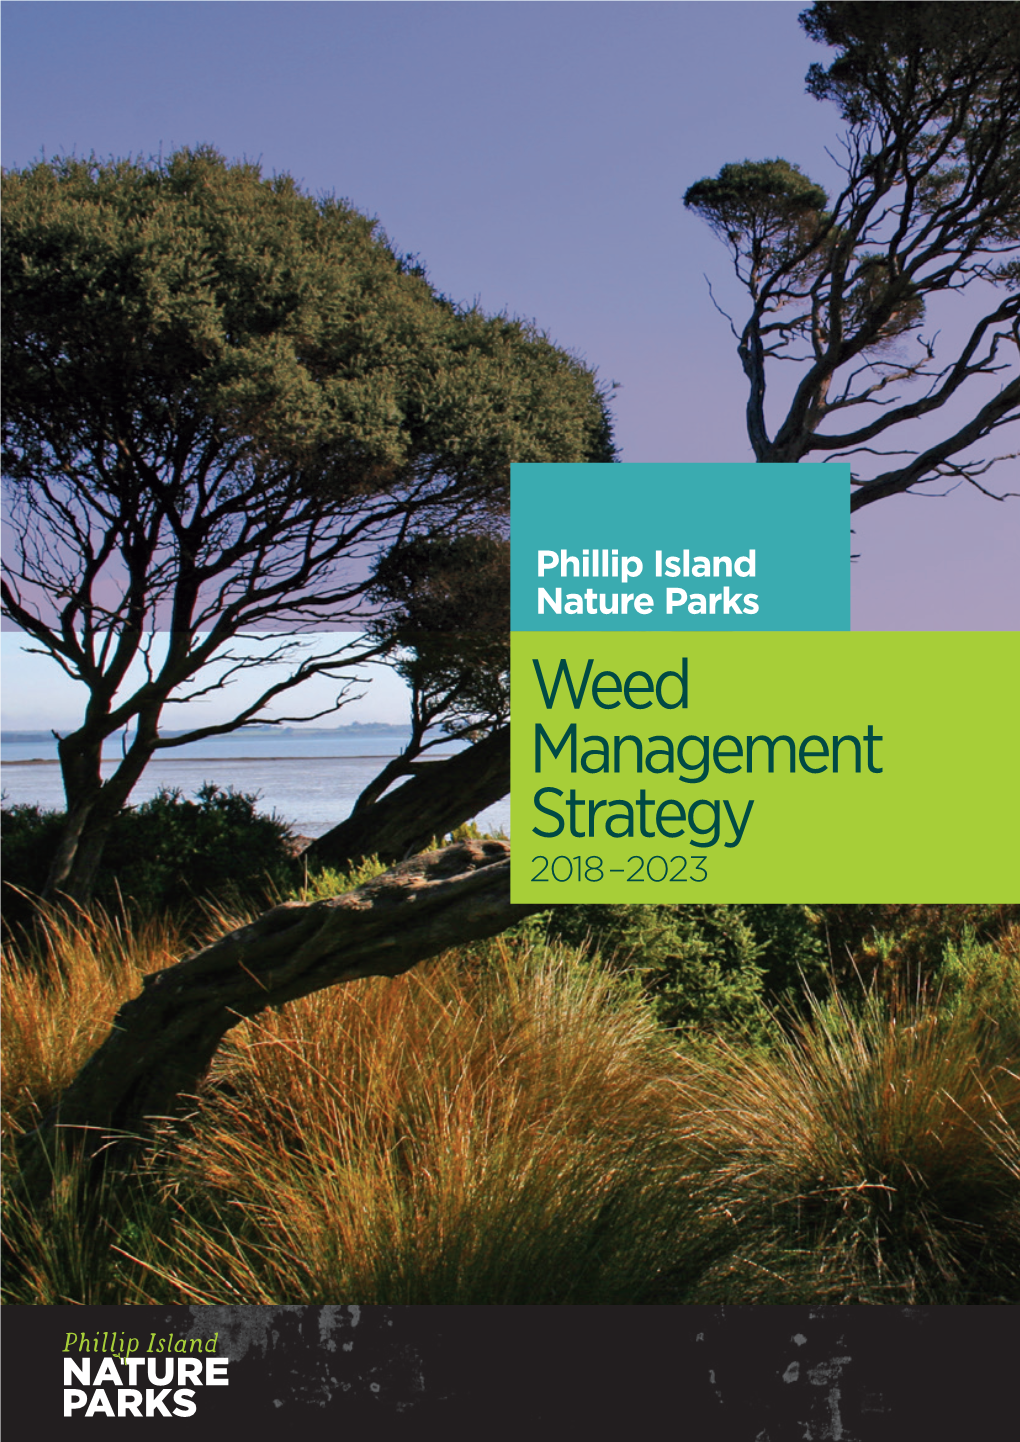 Phillip Island Nature Parks Weed Management Strategy 2018 –2023